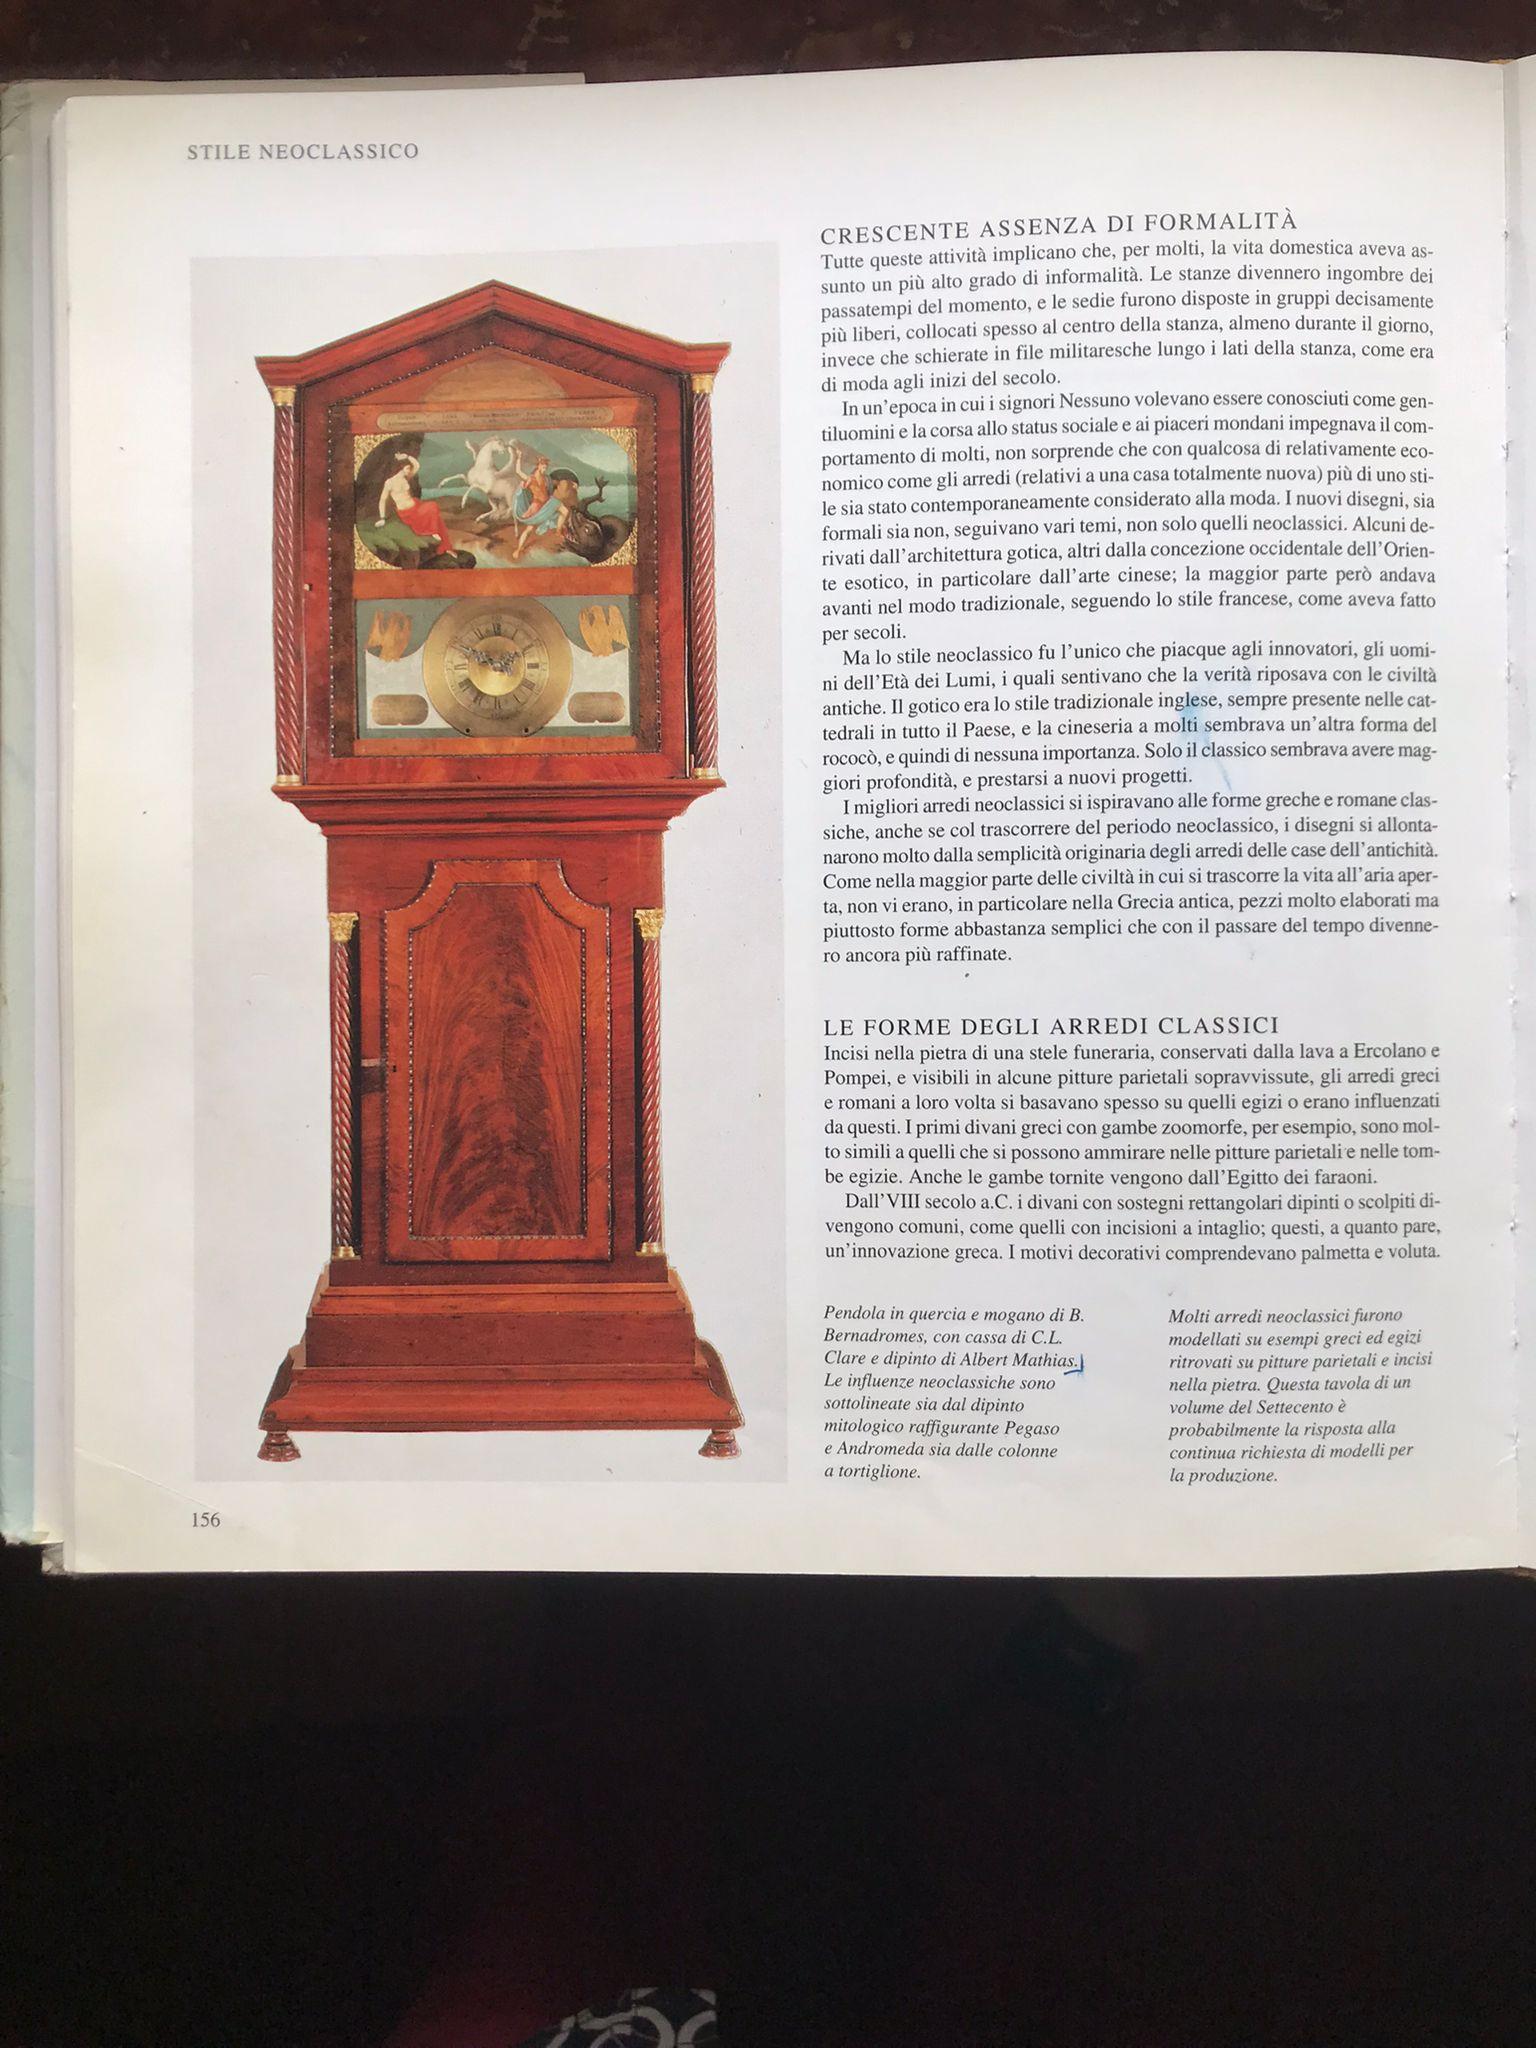 A Neoclssical Oak and mahogany long-case clock by B.Dernadromes, case by C.L.Clare, musical mechanism by G.Welte.
The 18th Century was a time of increasing prosperity, and numerous were the people eager to make the interior of their home as the